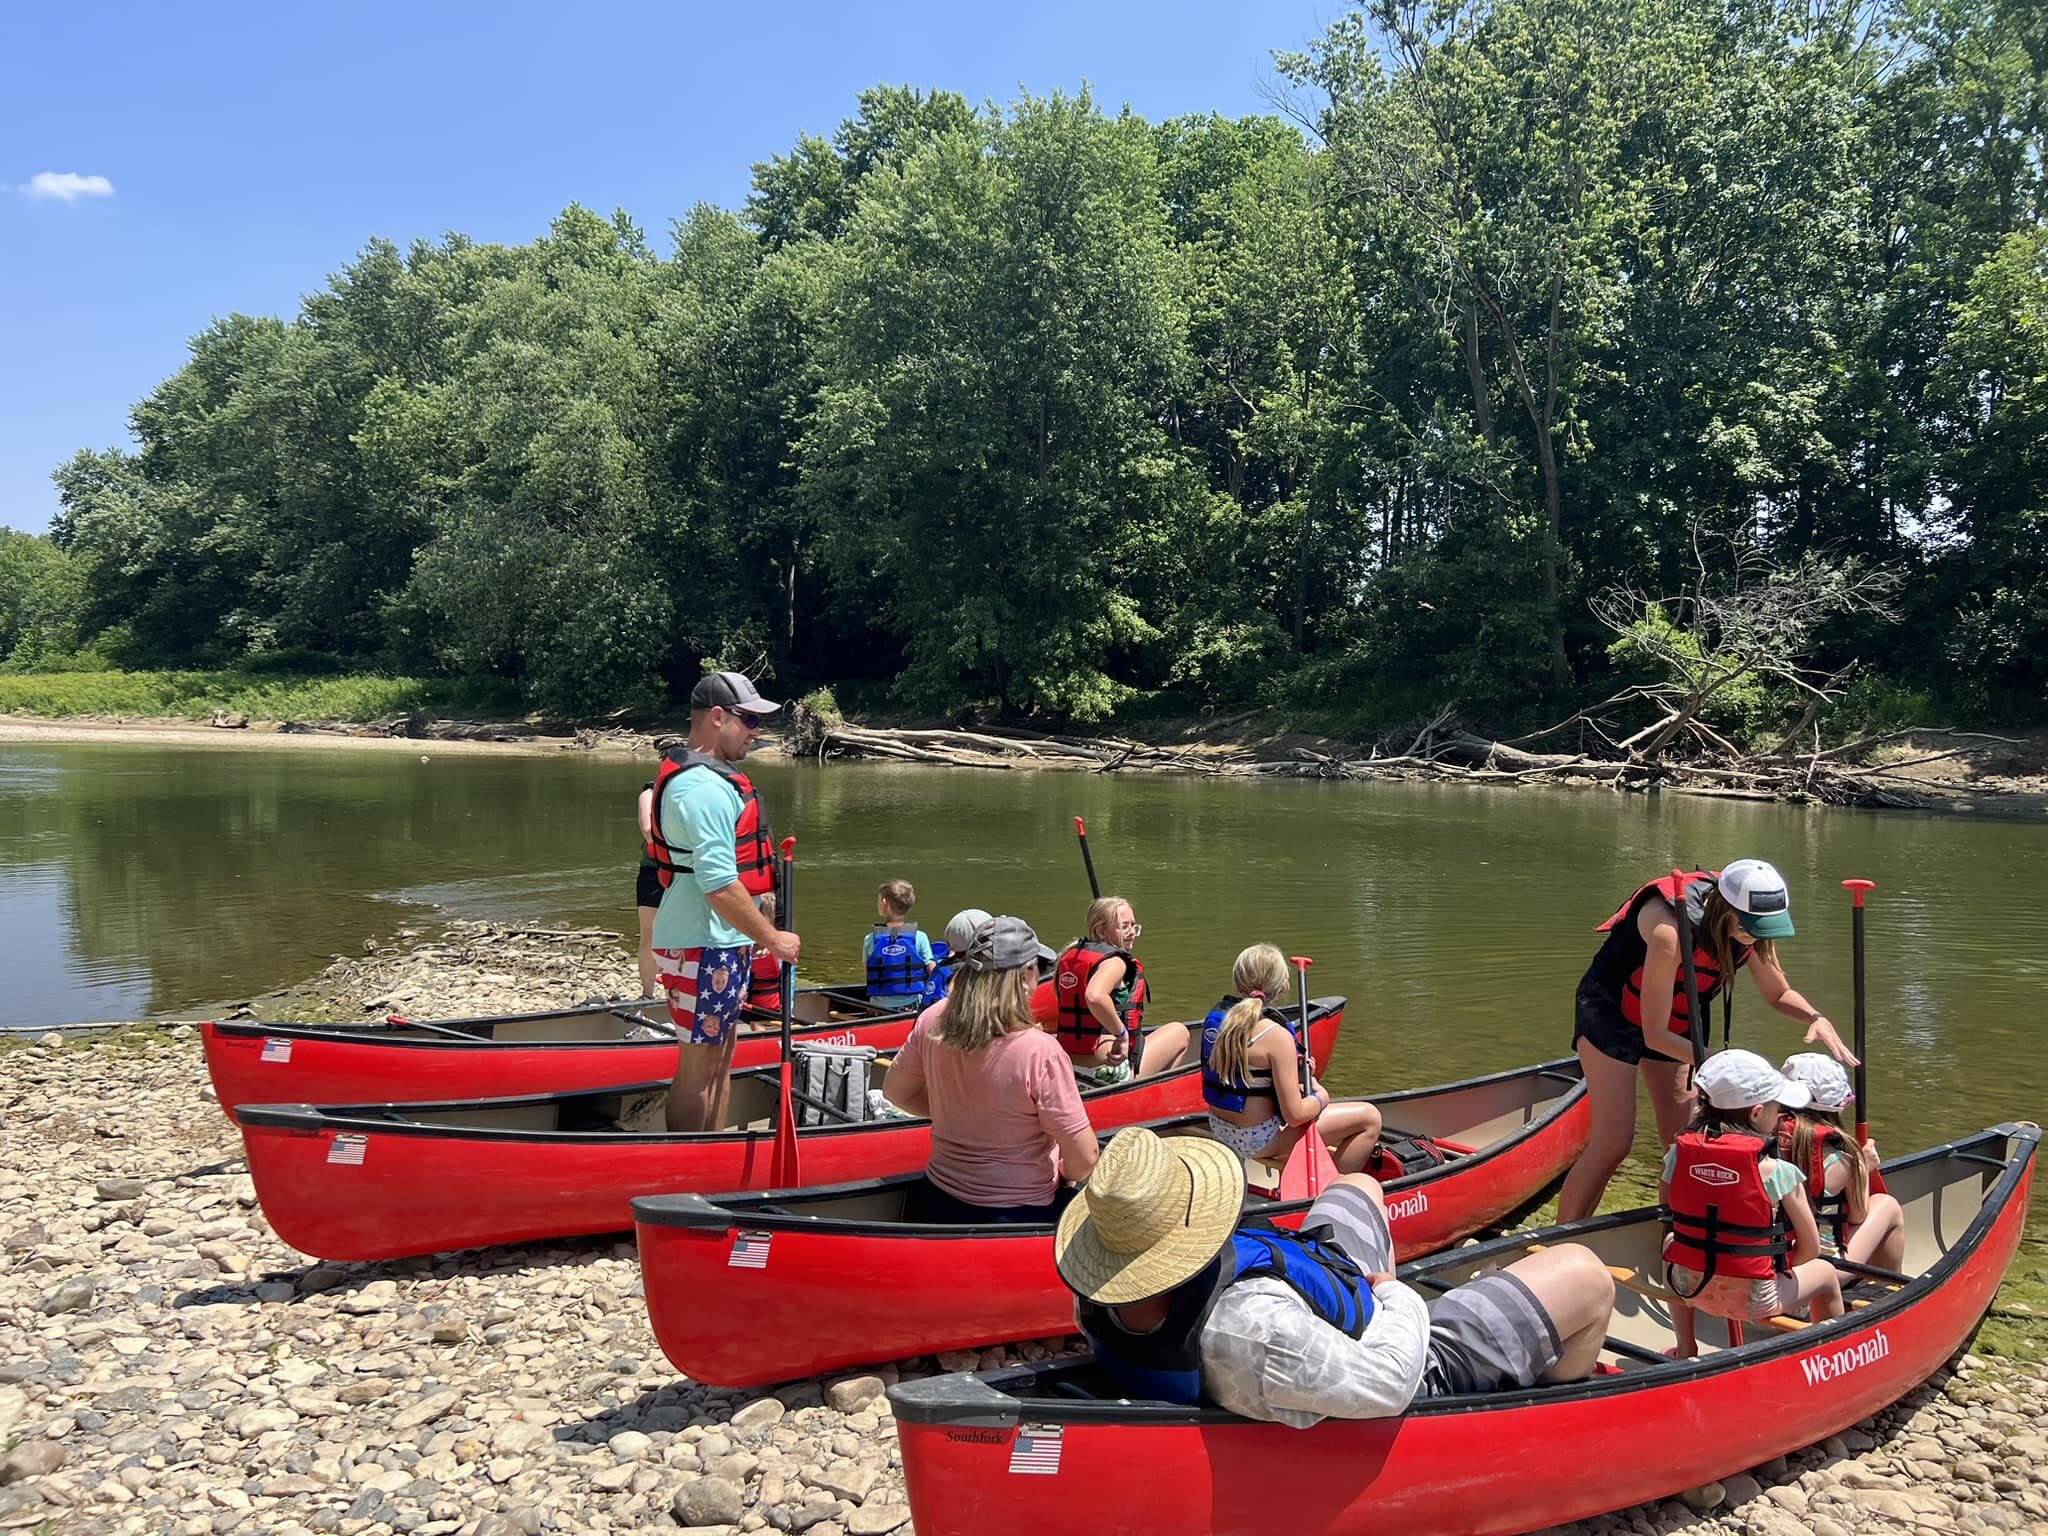 People prepare to canoe down the Wabash River.